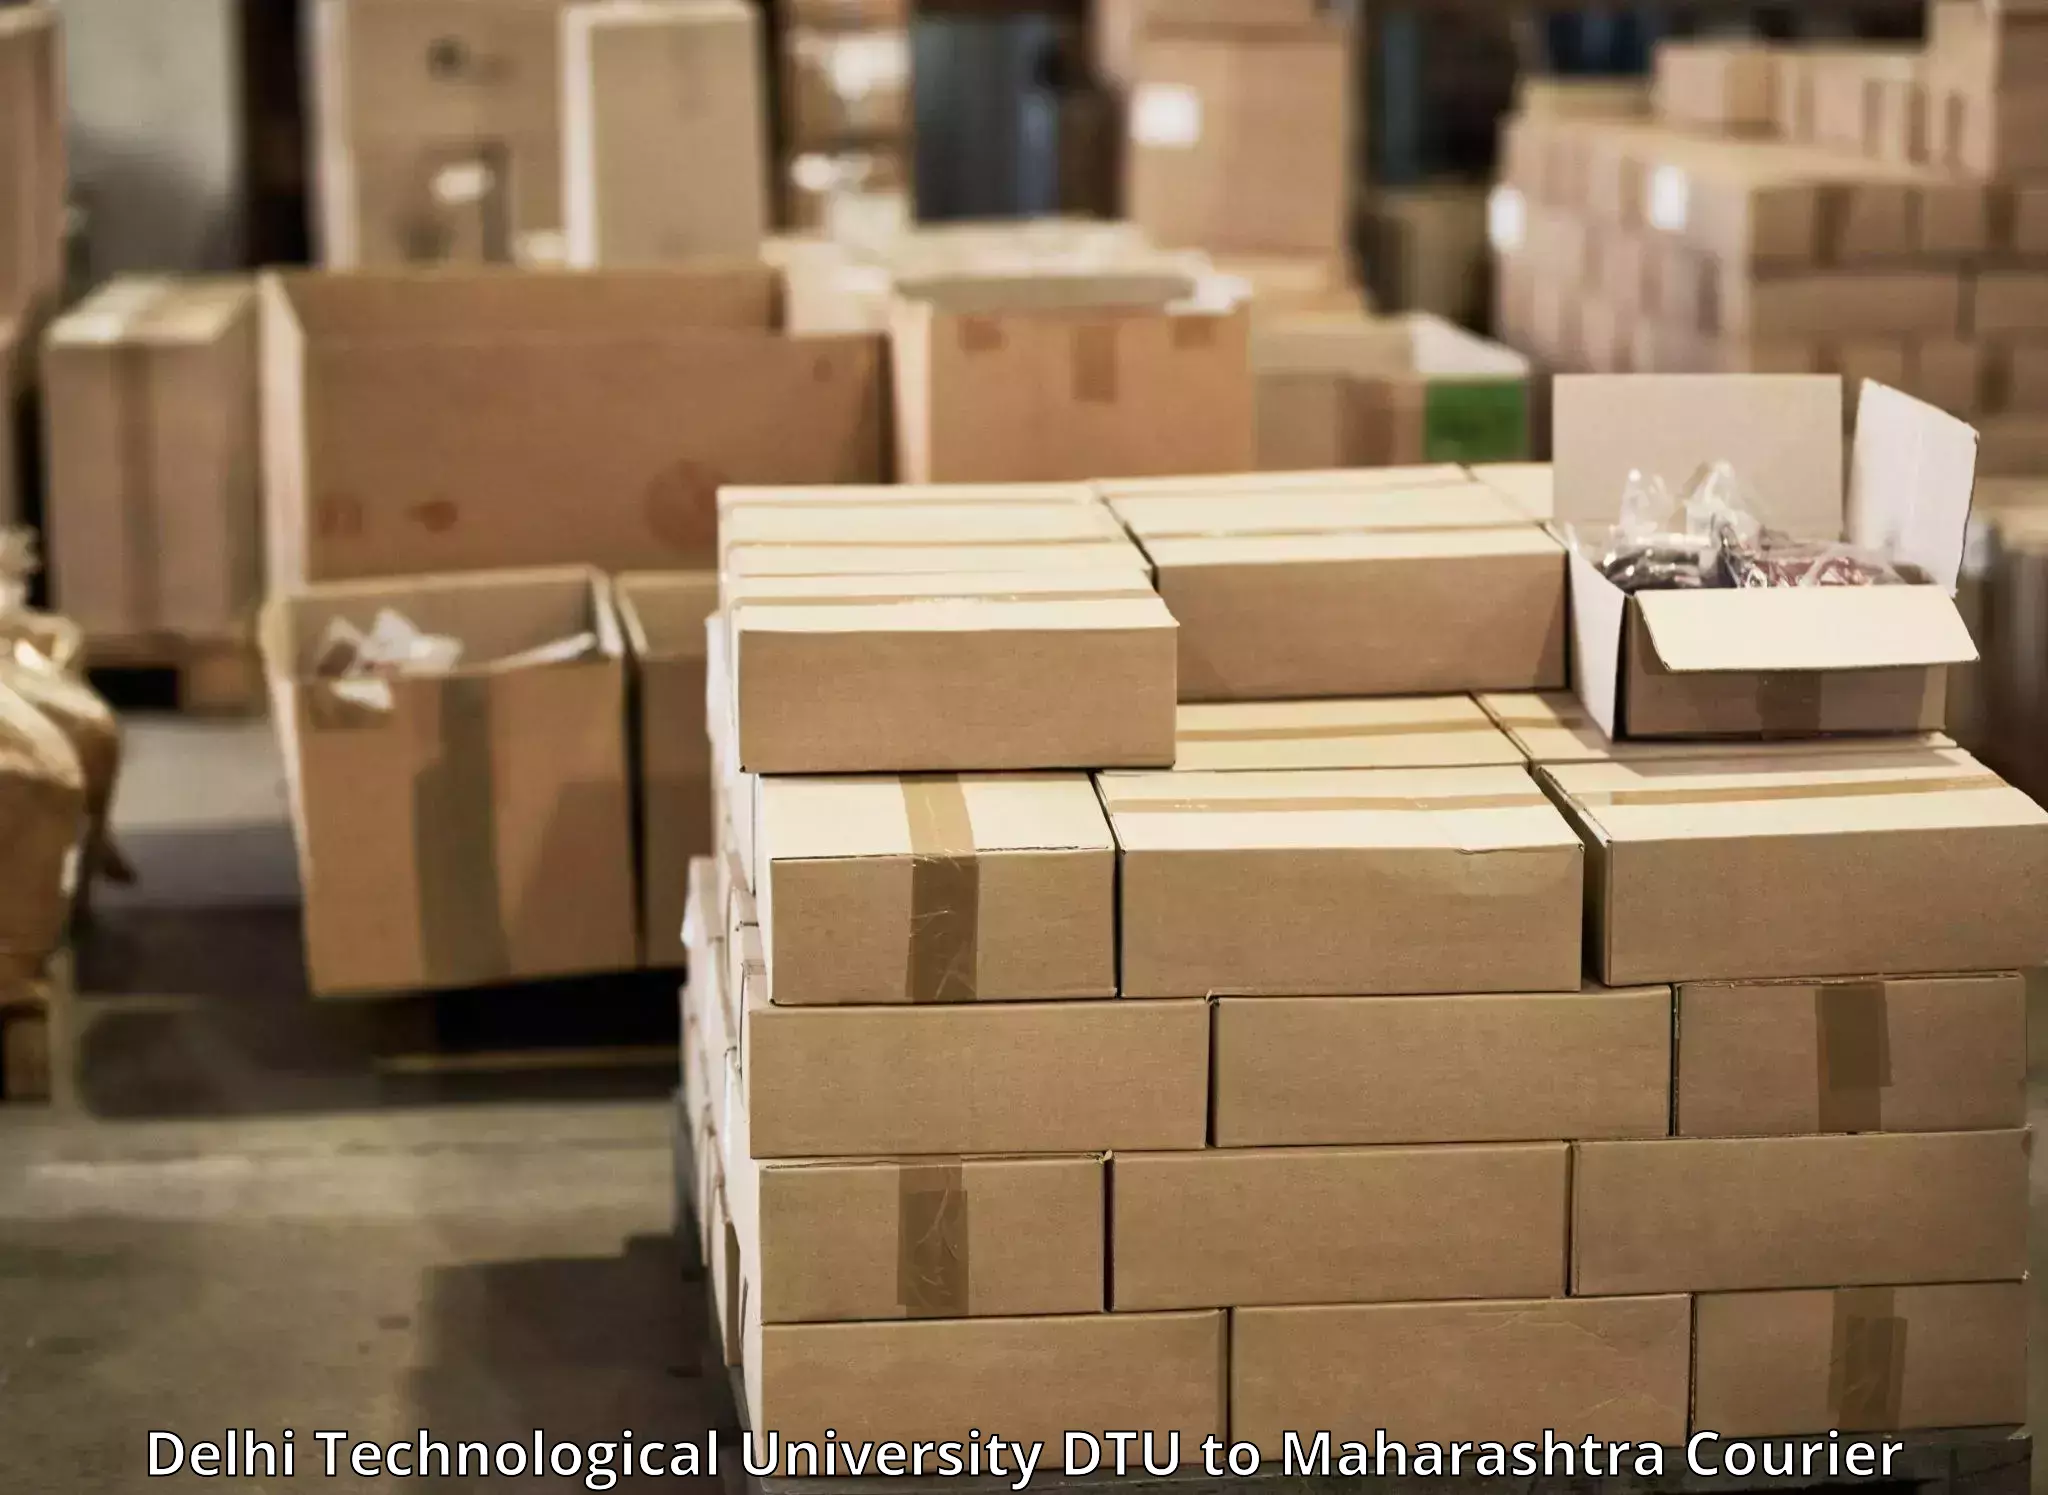 Scheduled delivery in Delhi Technological University DTU to Maharashtra